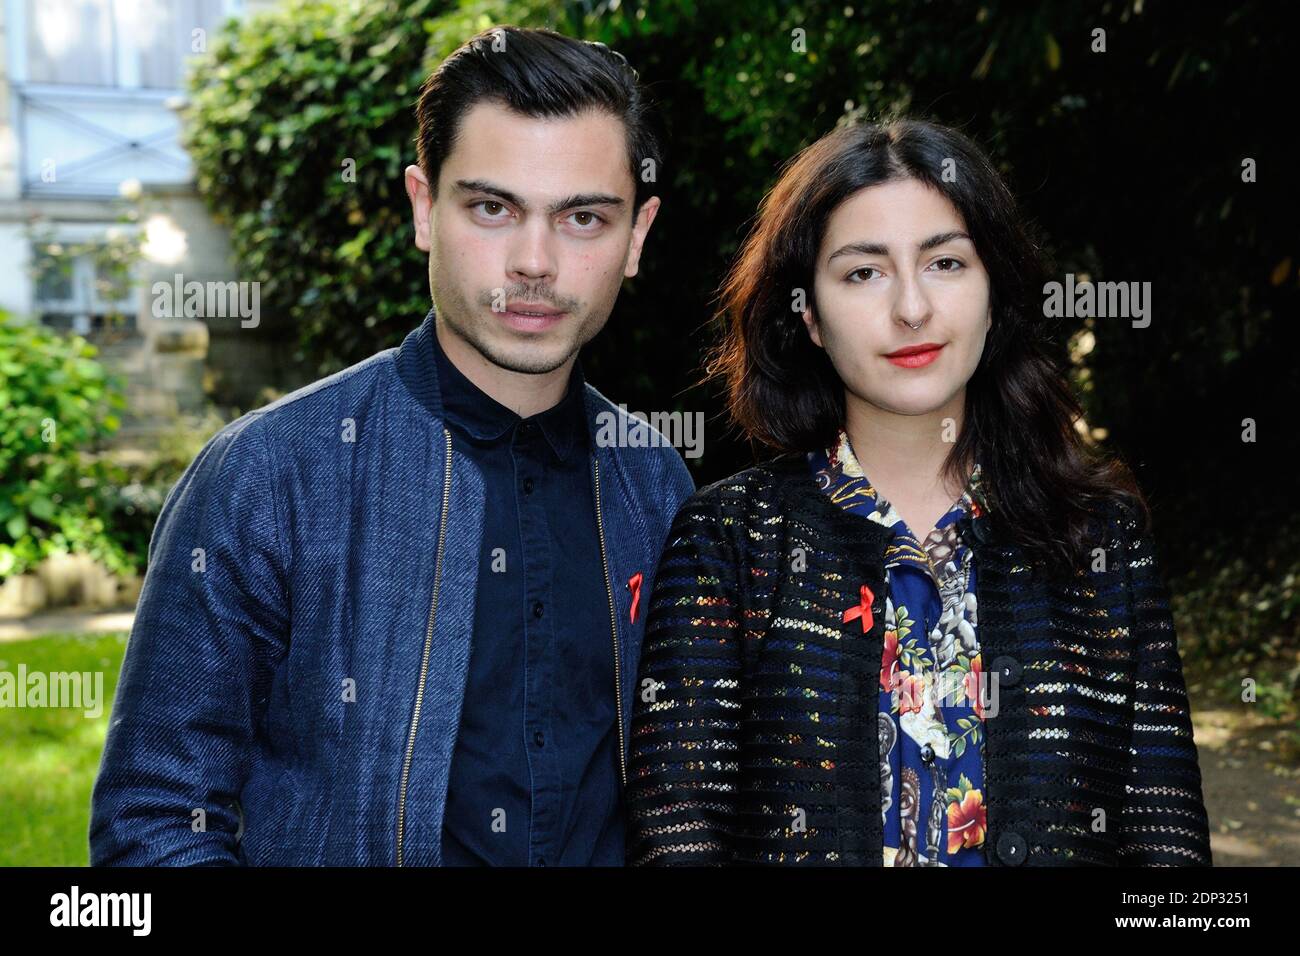 Lilly Wood and the Prick (Benjamin Cotto and Nili Hadida) attending the Solidays press conference in Paris, France on May 27, 2015. Photo by Aurore Marechal/ABACAPRESS.COM Stock Photo